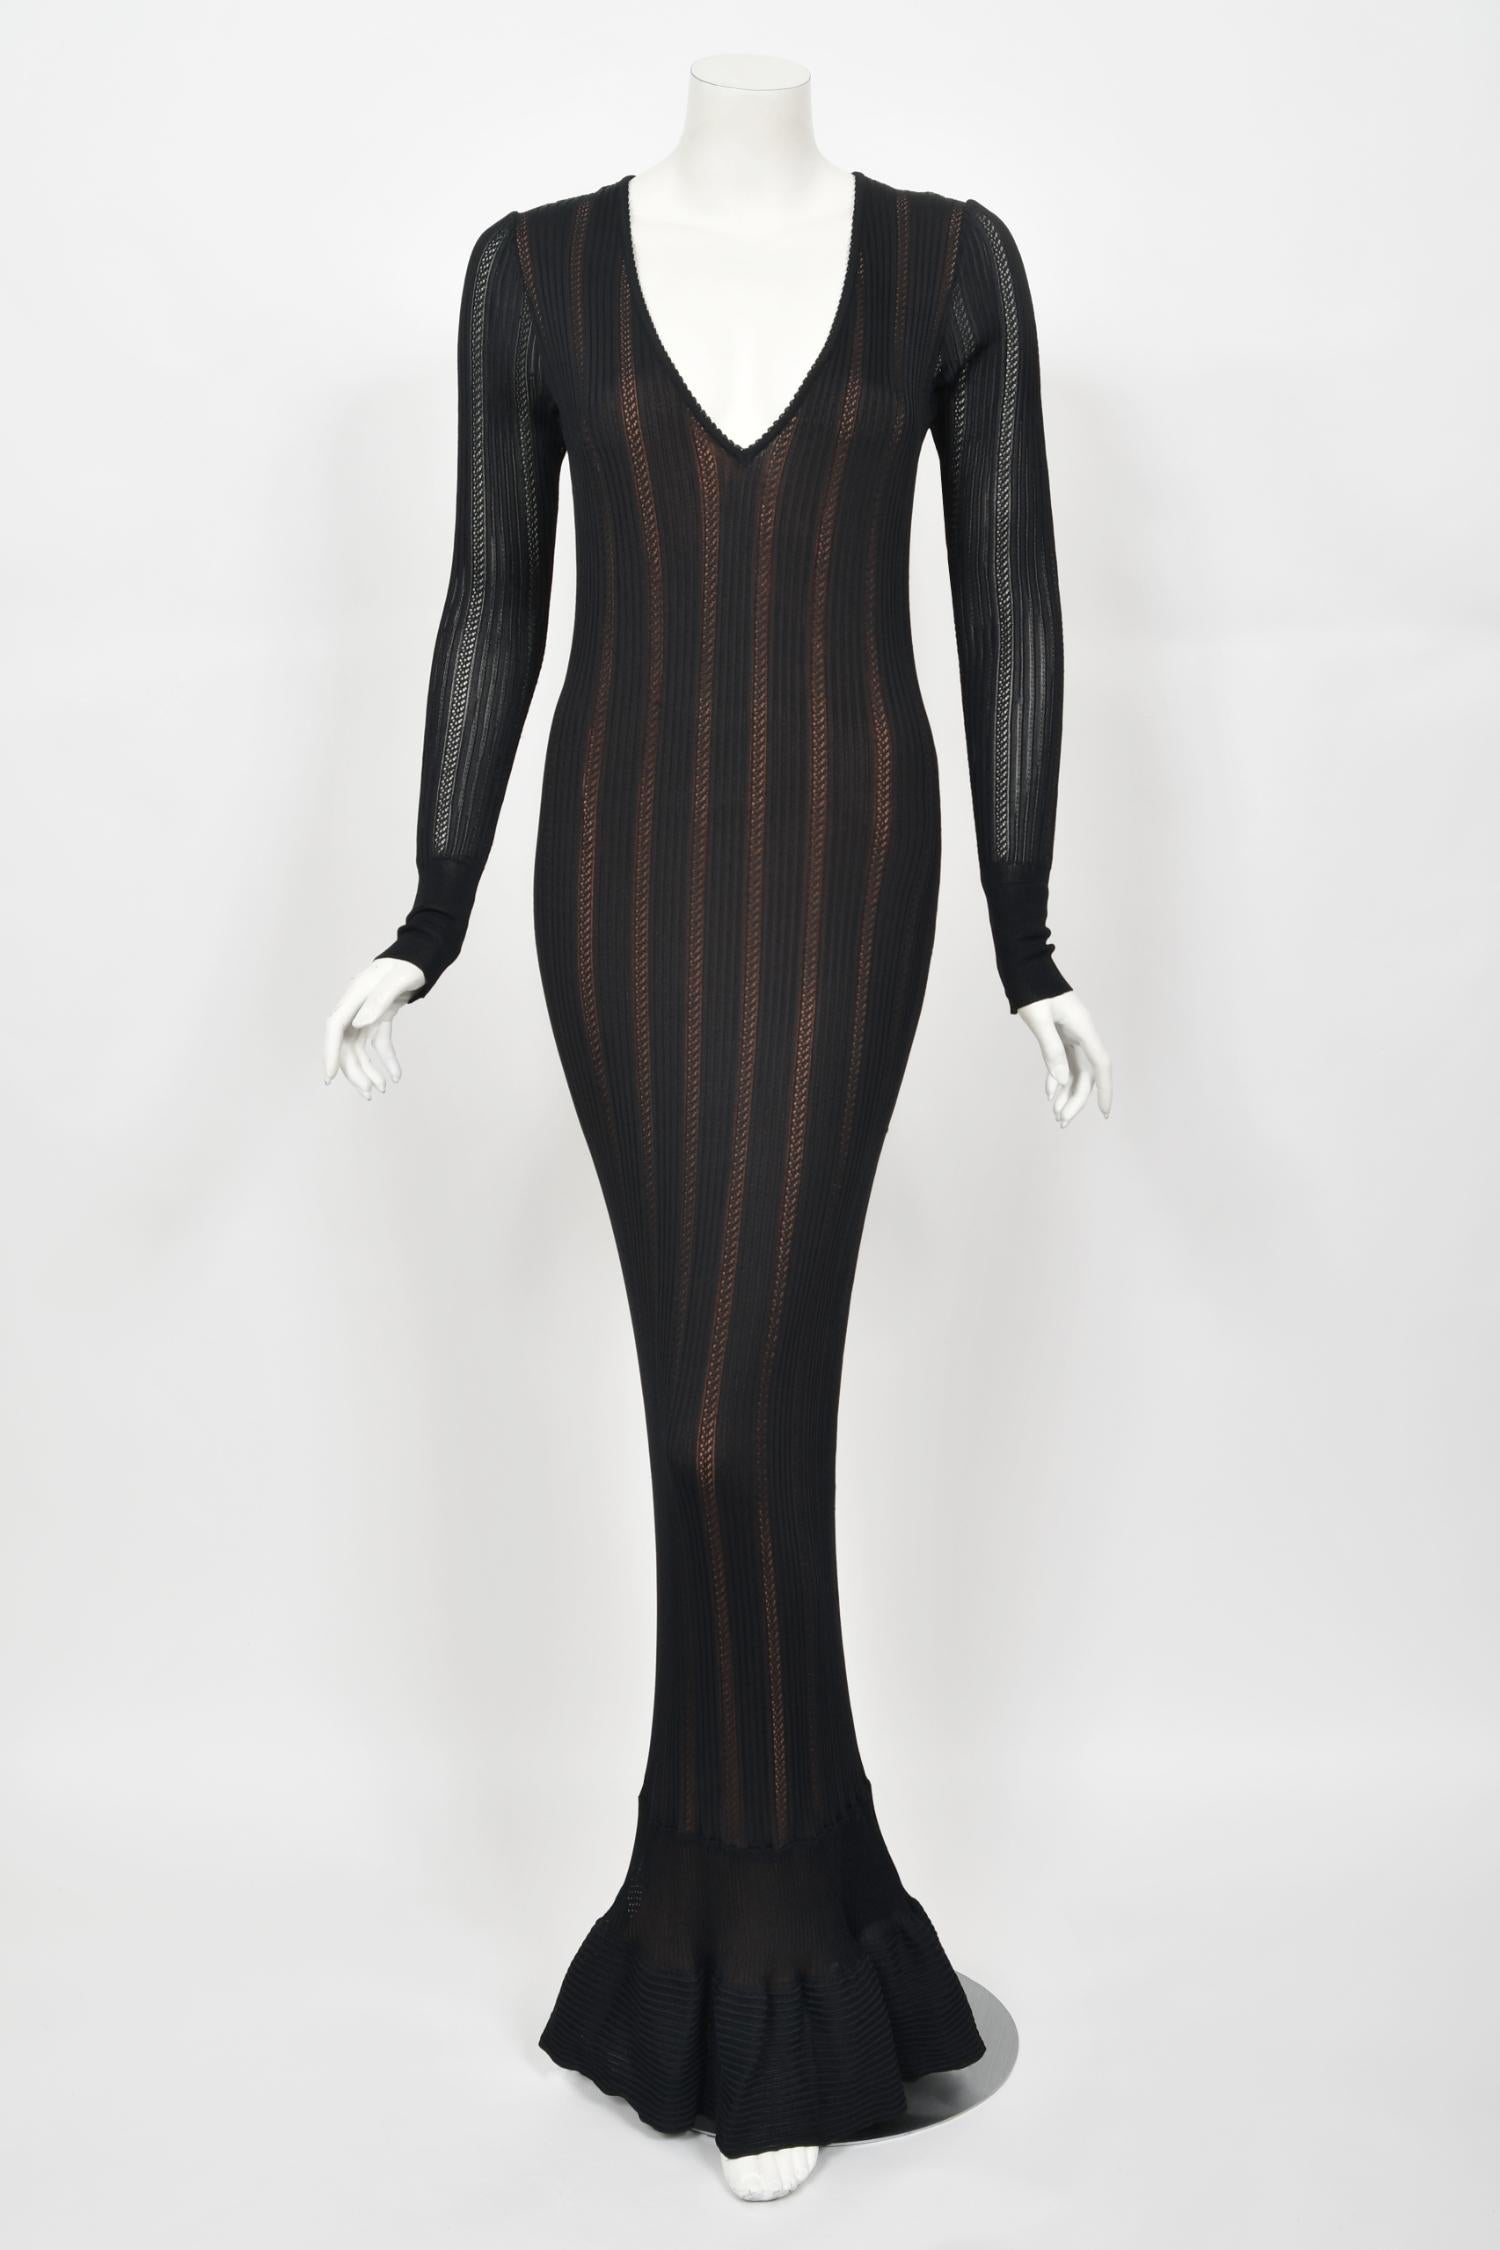 1996 Azzedine Alaia Documented Rare Nude Illusion Knit Bodycon Floor Length Gown For Sale 3